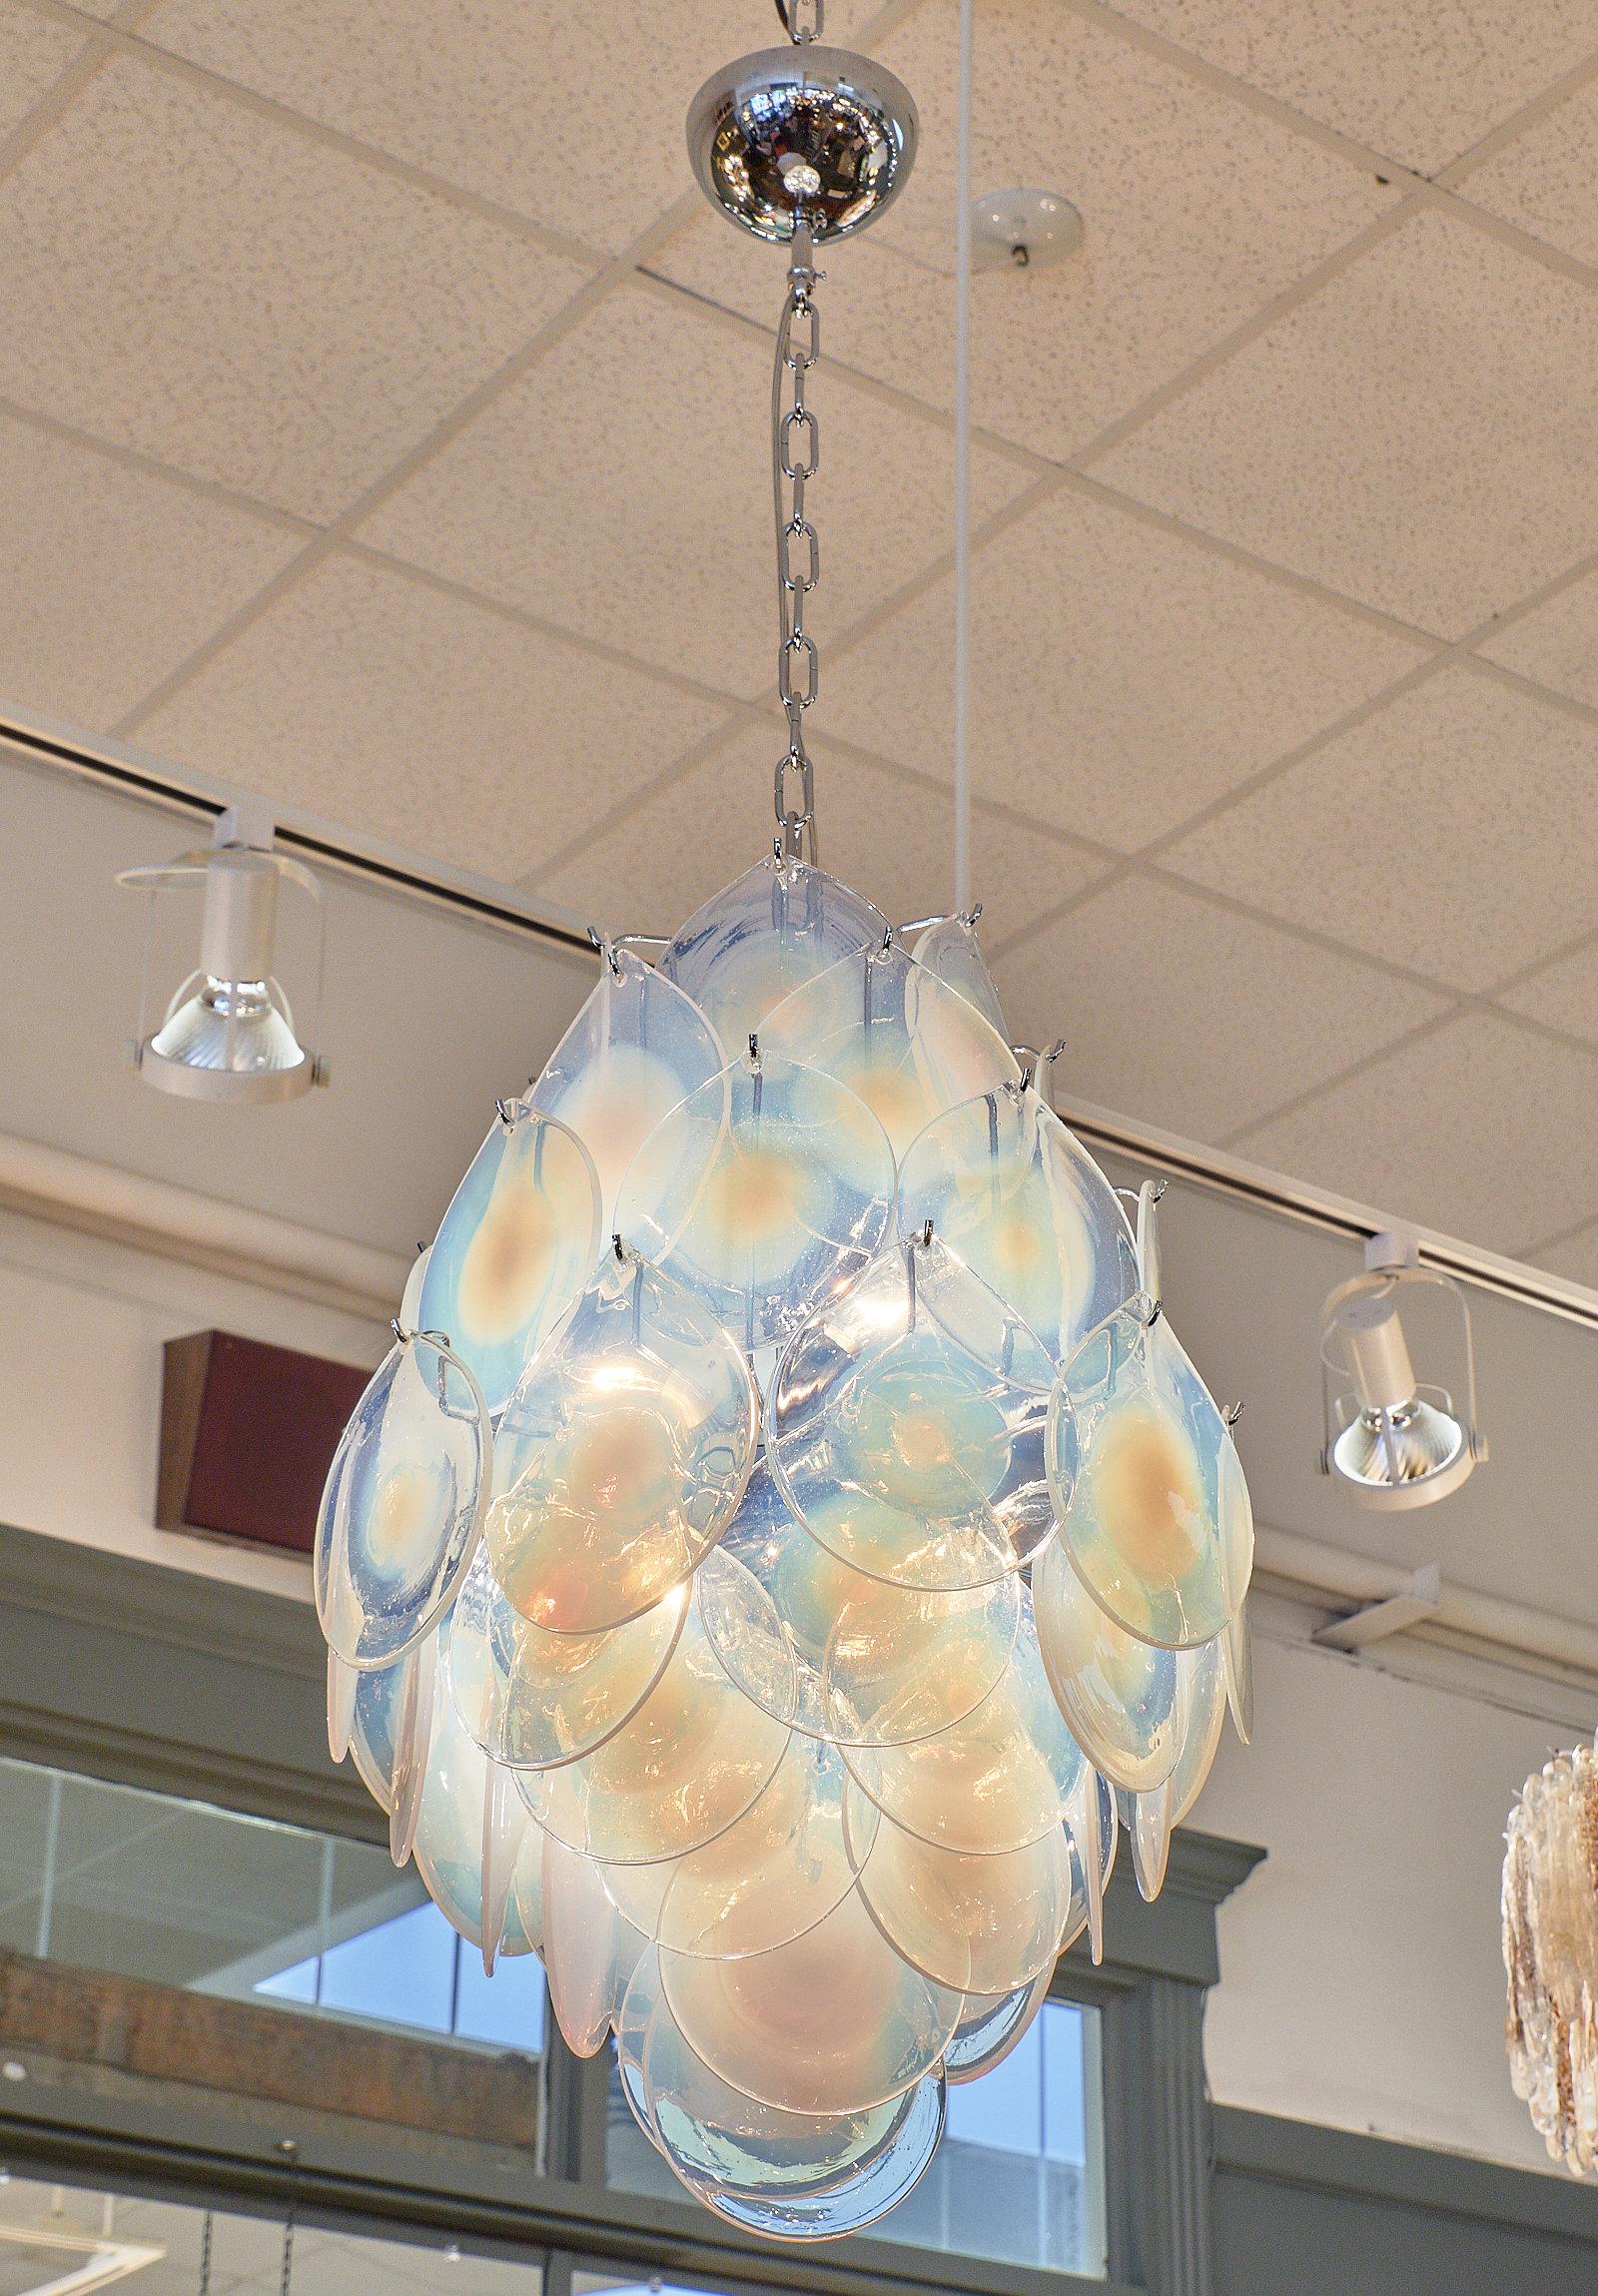 A Murano glass iridescent pendant chandelier featuring multiple spheres in the “girasole” iridescent color. This piece has been newly wired for US standards.